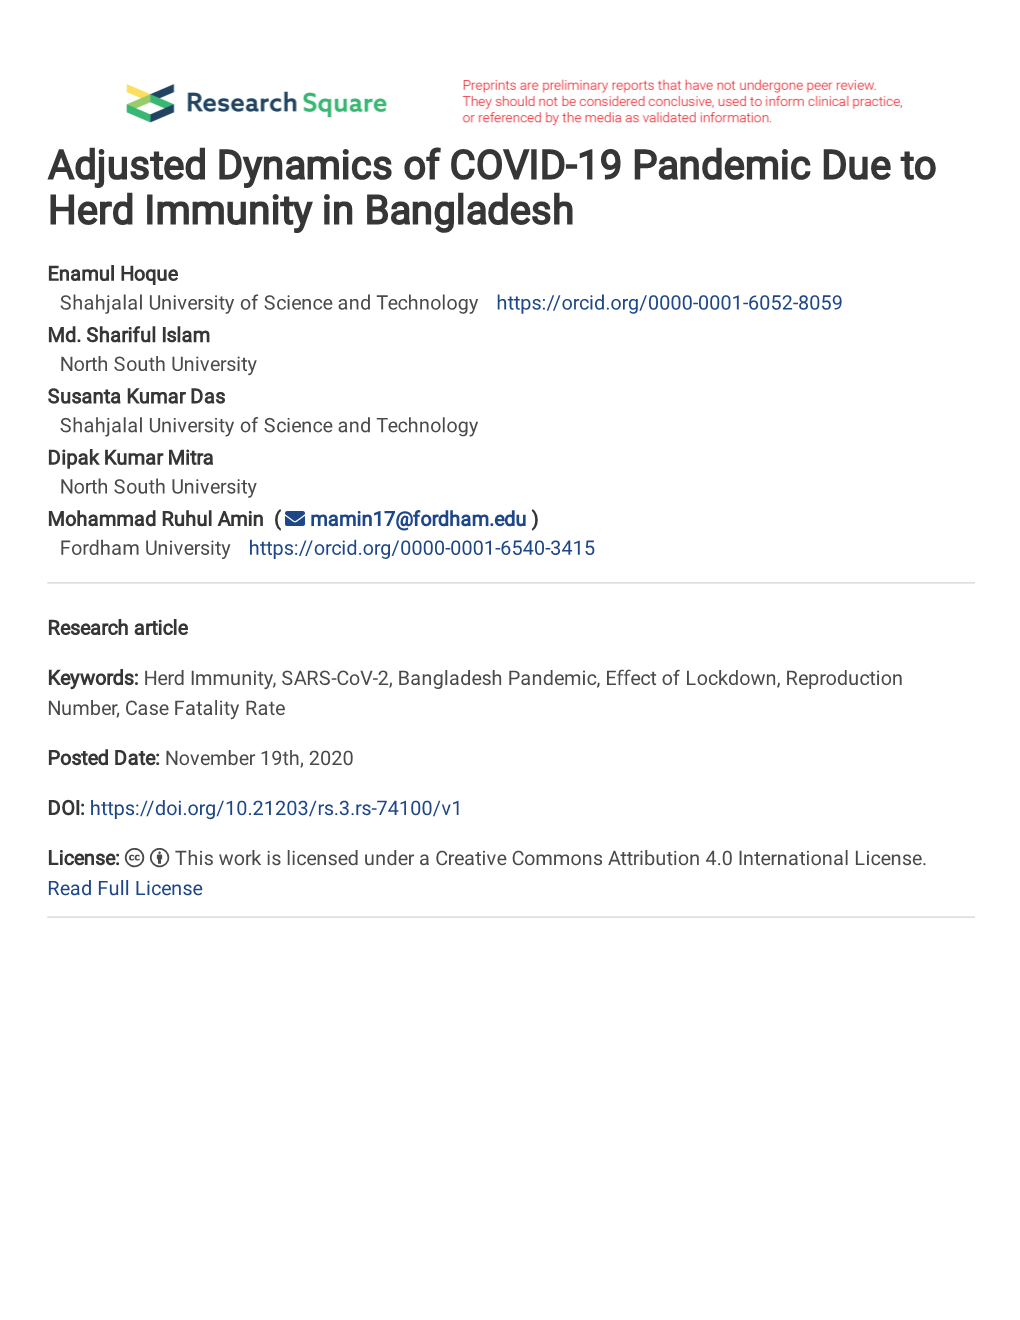 Adjusted Dynamics of COVID-19 Pandemic Due to Herd Immunity in Bangladesh